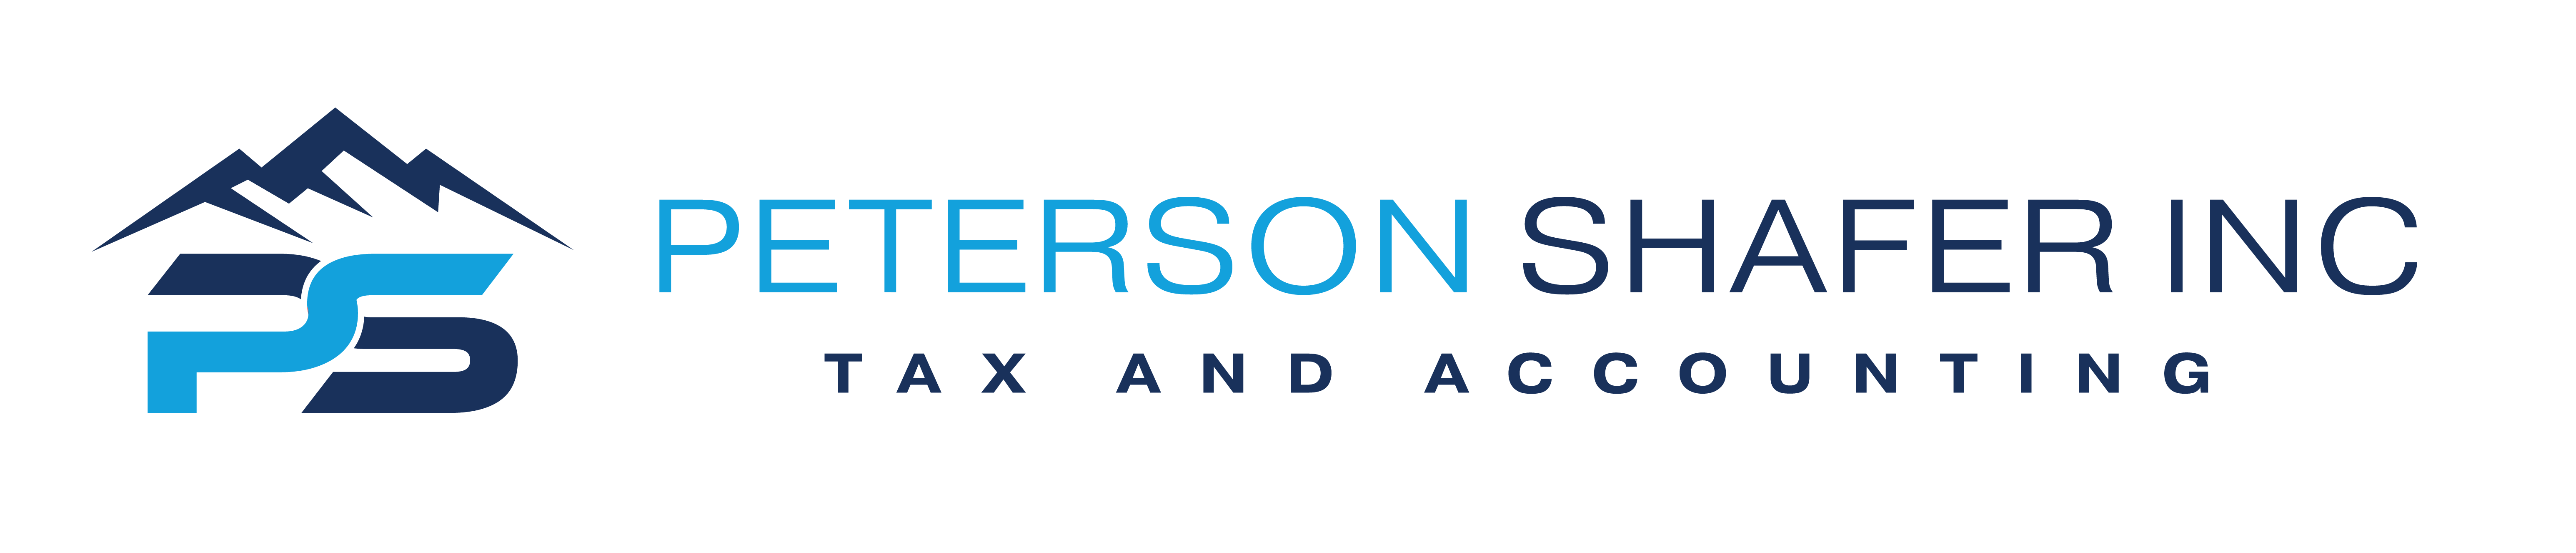 Peterson Shafer Inc